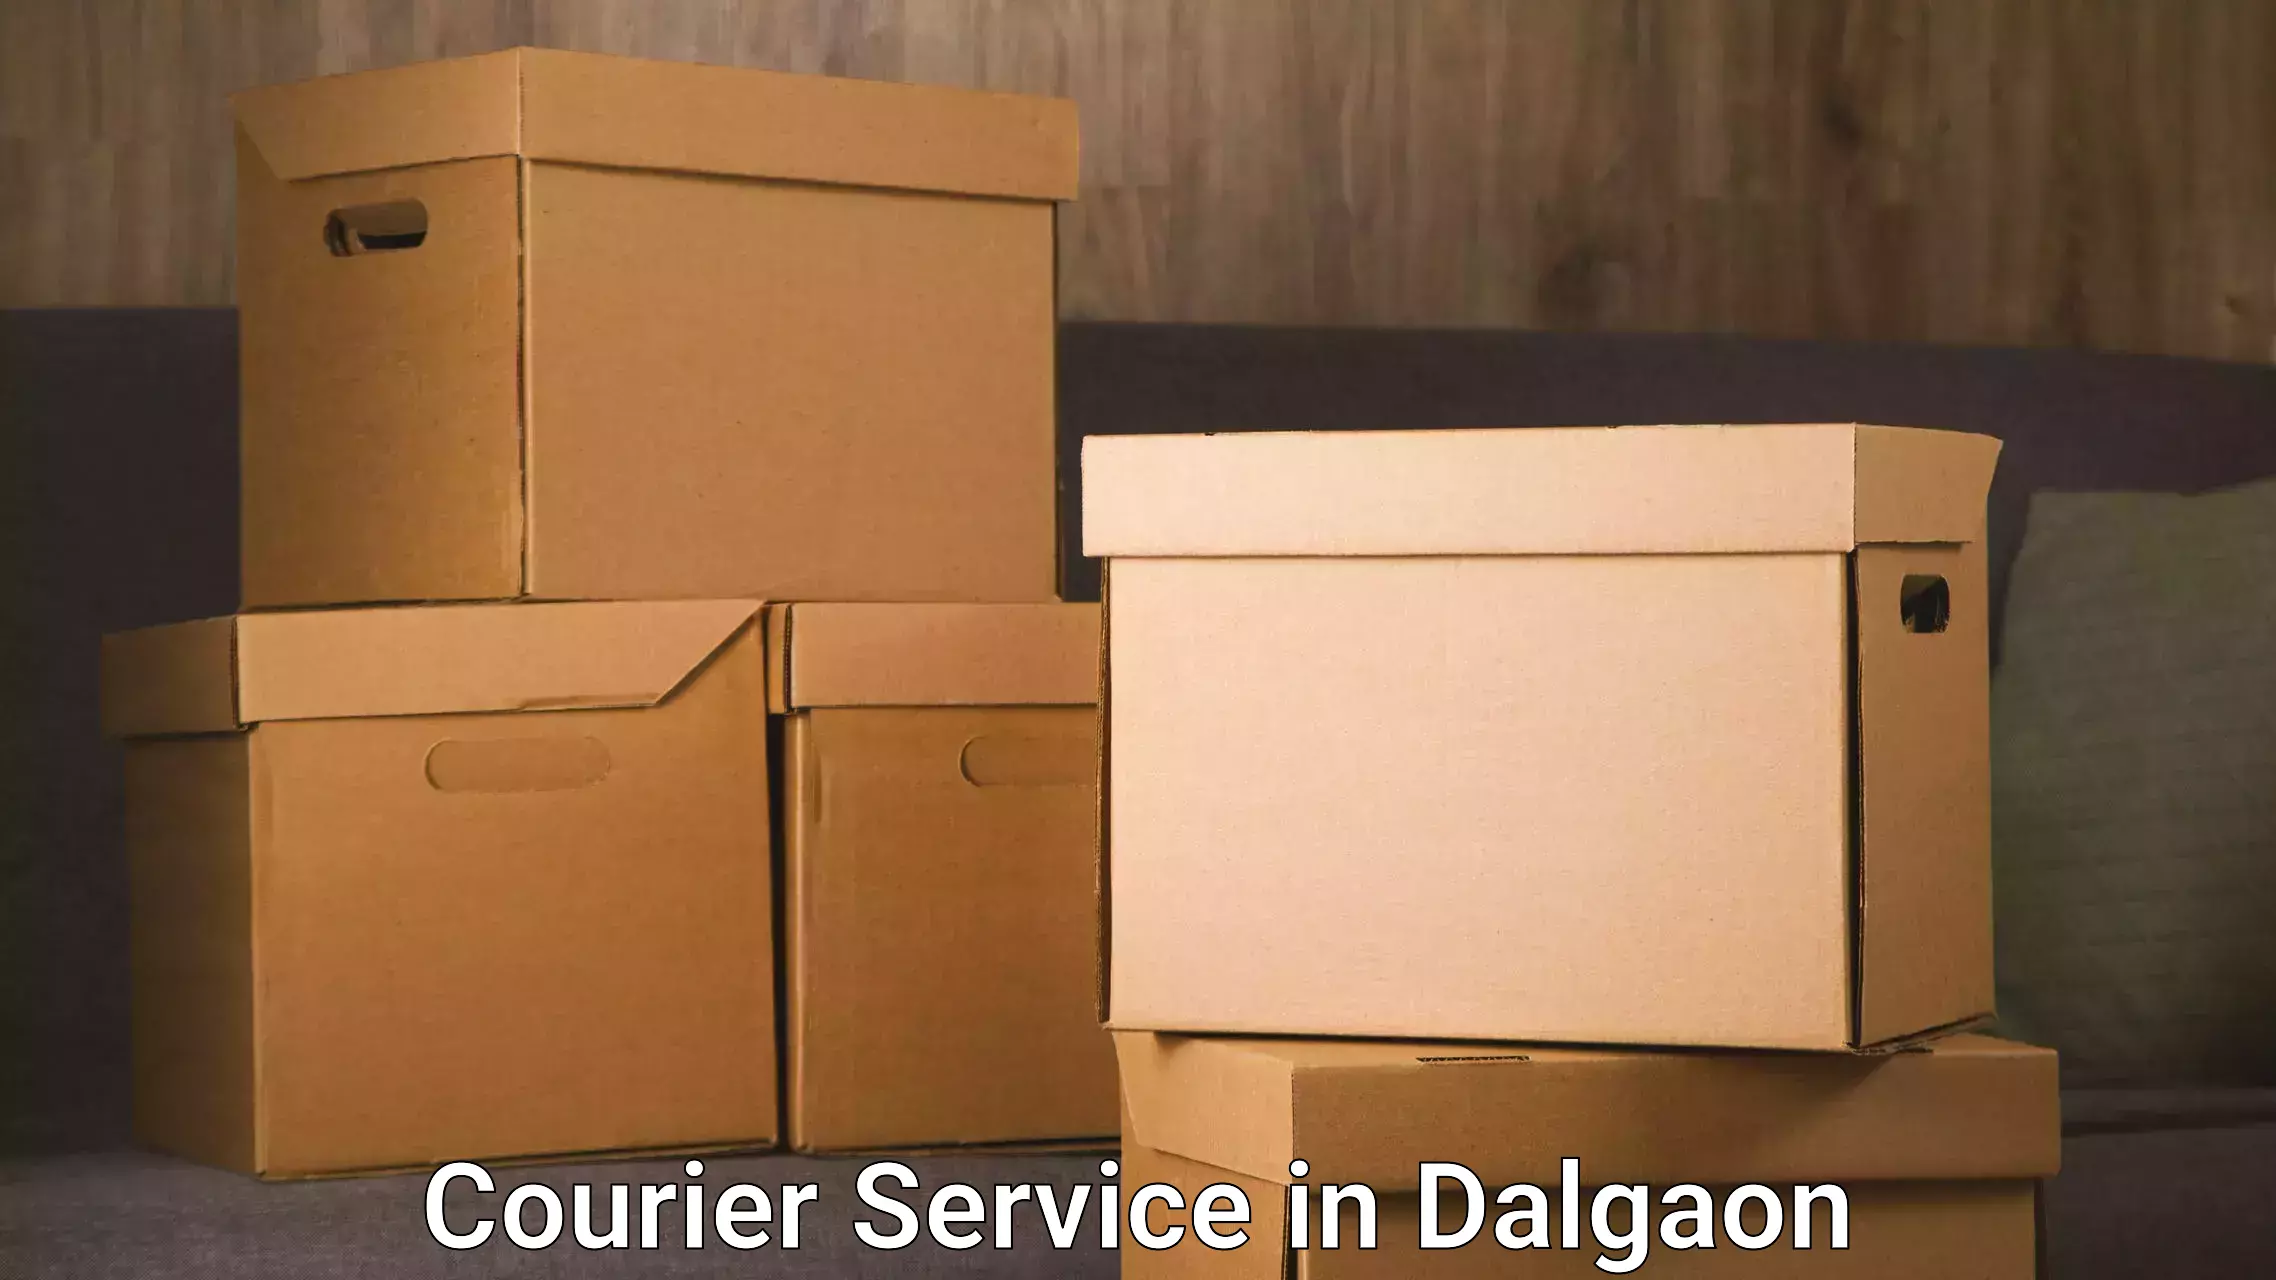 High-speed delivery in Dalgaon